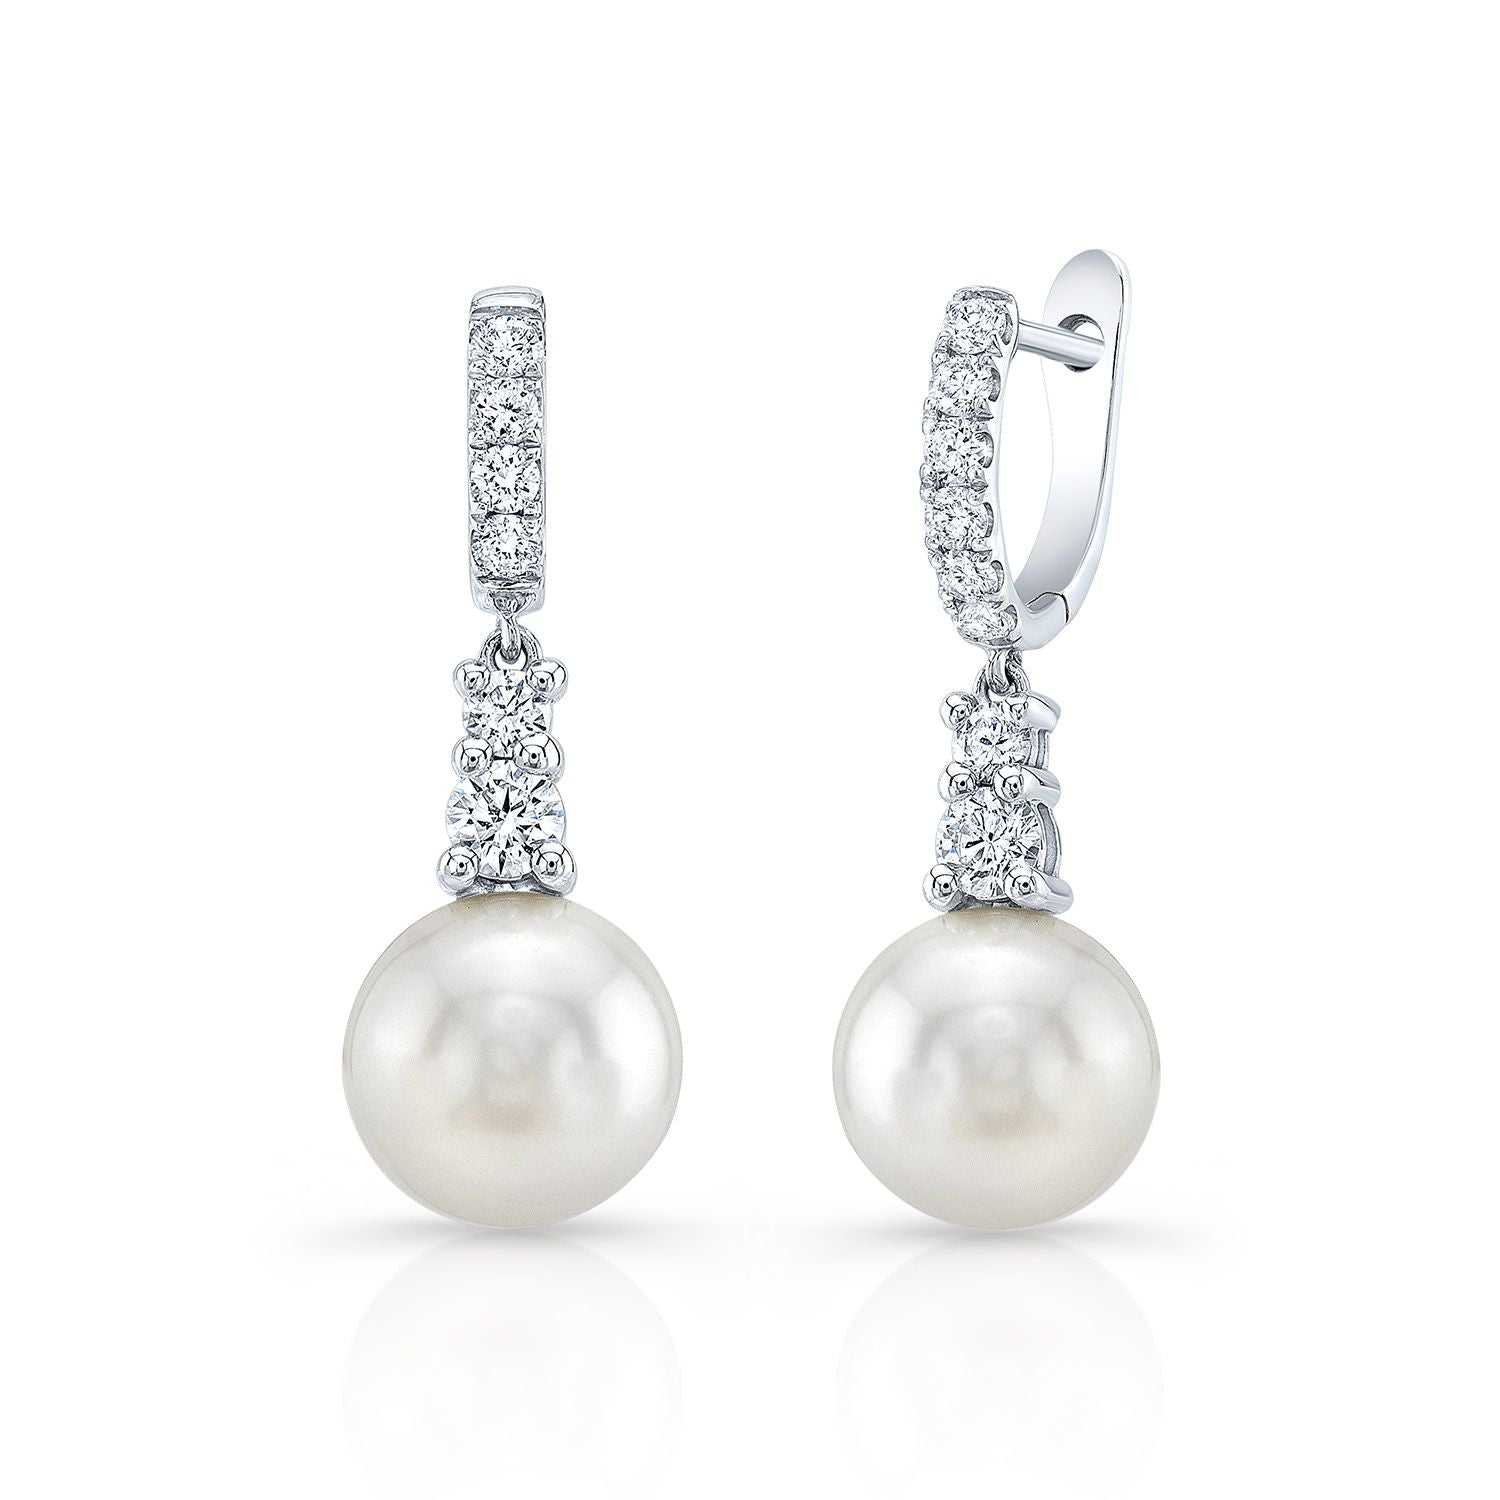 White Pearl And Diamond Dangle Earrings With Prong-set Tops And Hinged Post  Backs In 14k White Gold (8.0-8.5mm) (si)